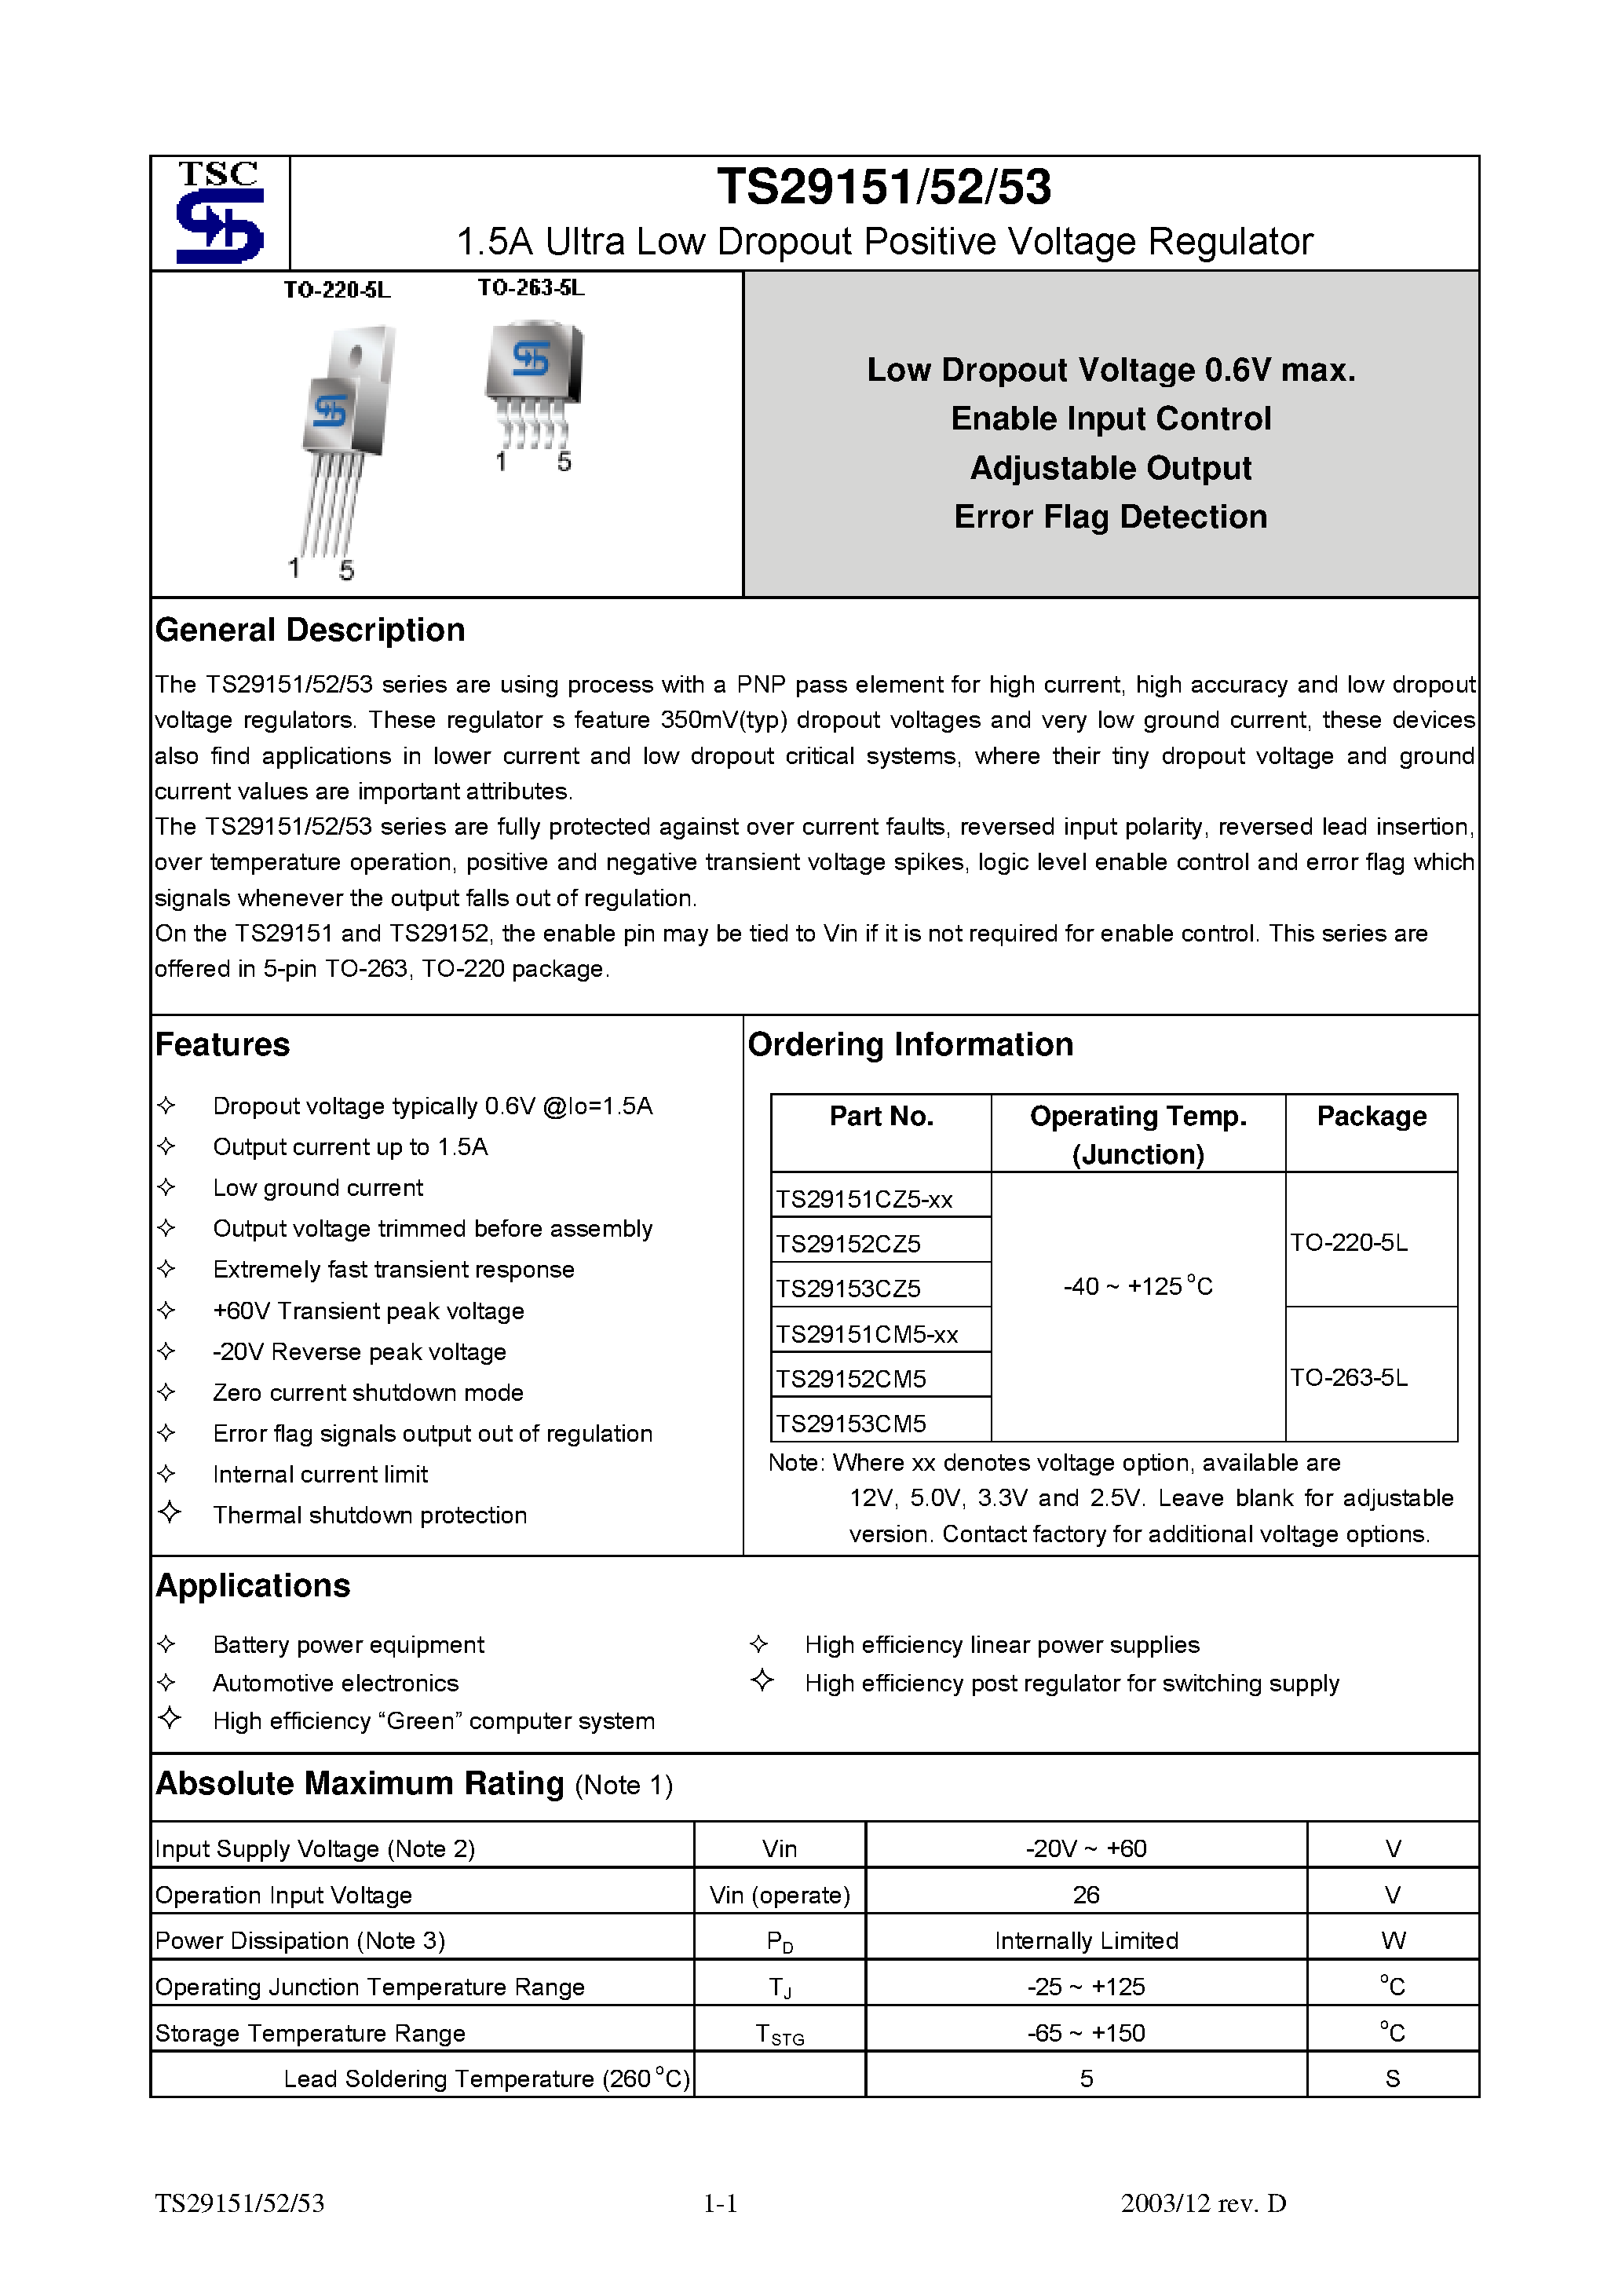 Datasheet TS29151 - (TS29151 - TS29153) 1.5A Ultra Low Dropout Positive Voltage Regulator page 1